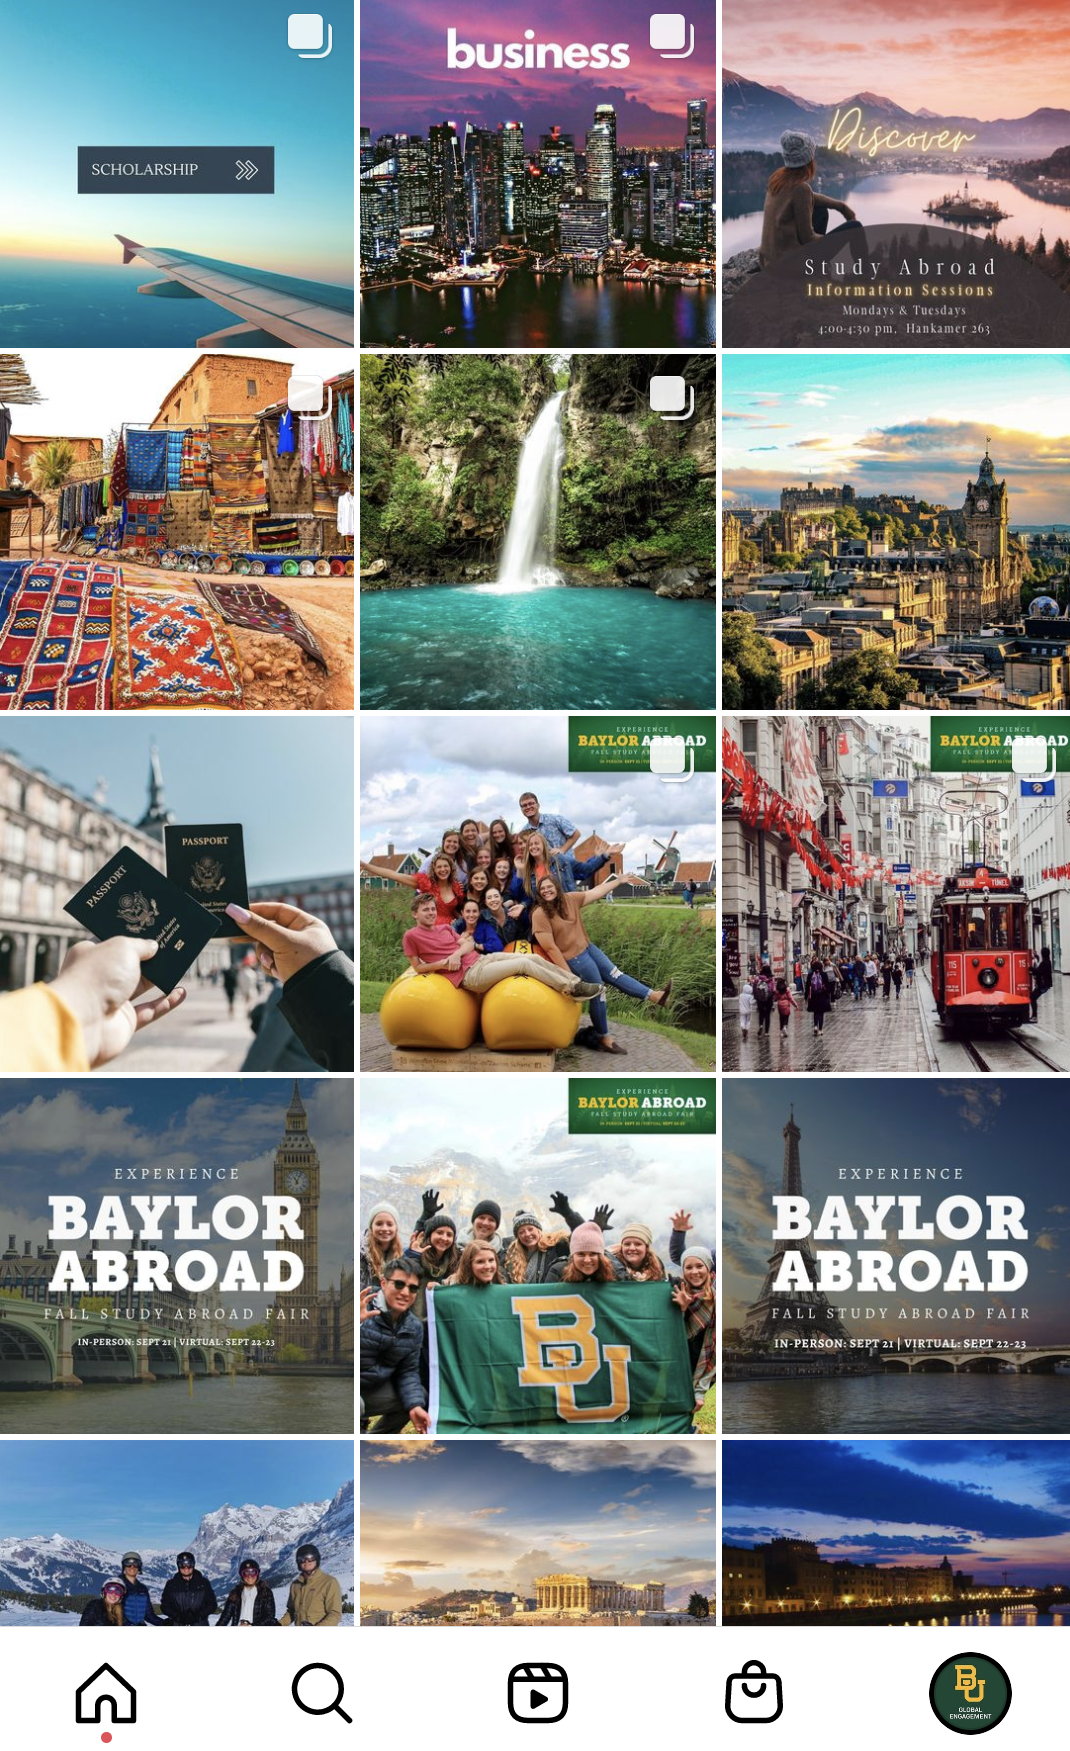 An Instagram page displaying pictures from abroad.